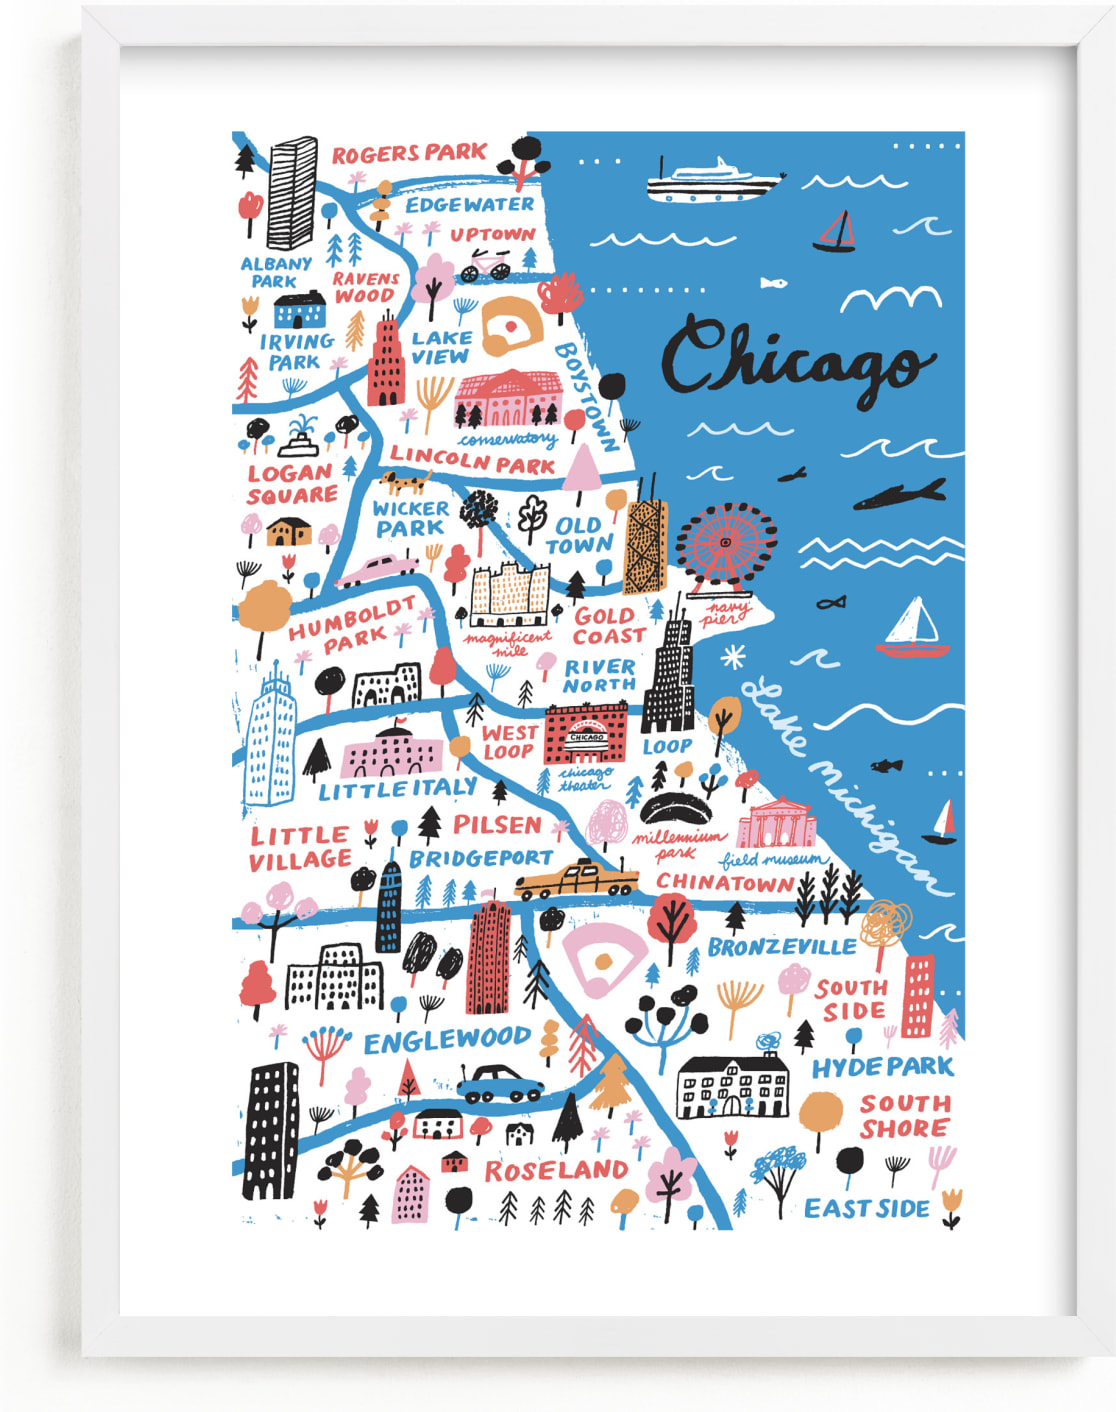 This is a blue art by Jordan Sondler called I Love Chicago.